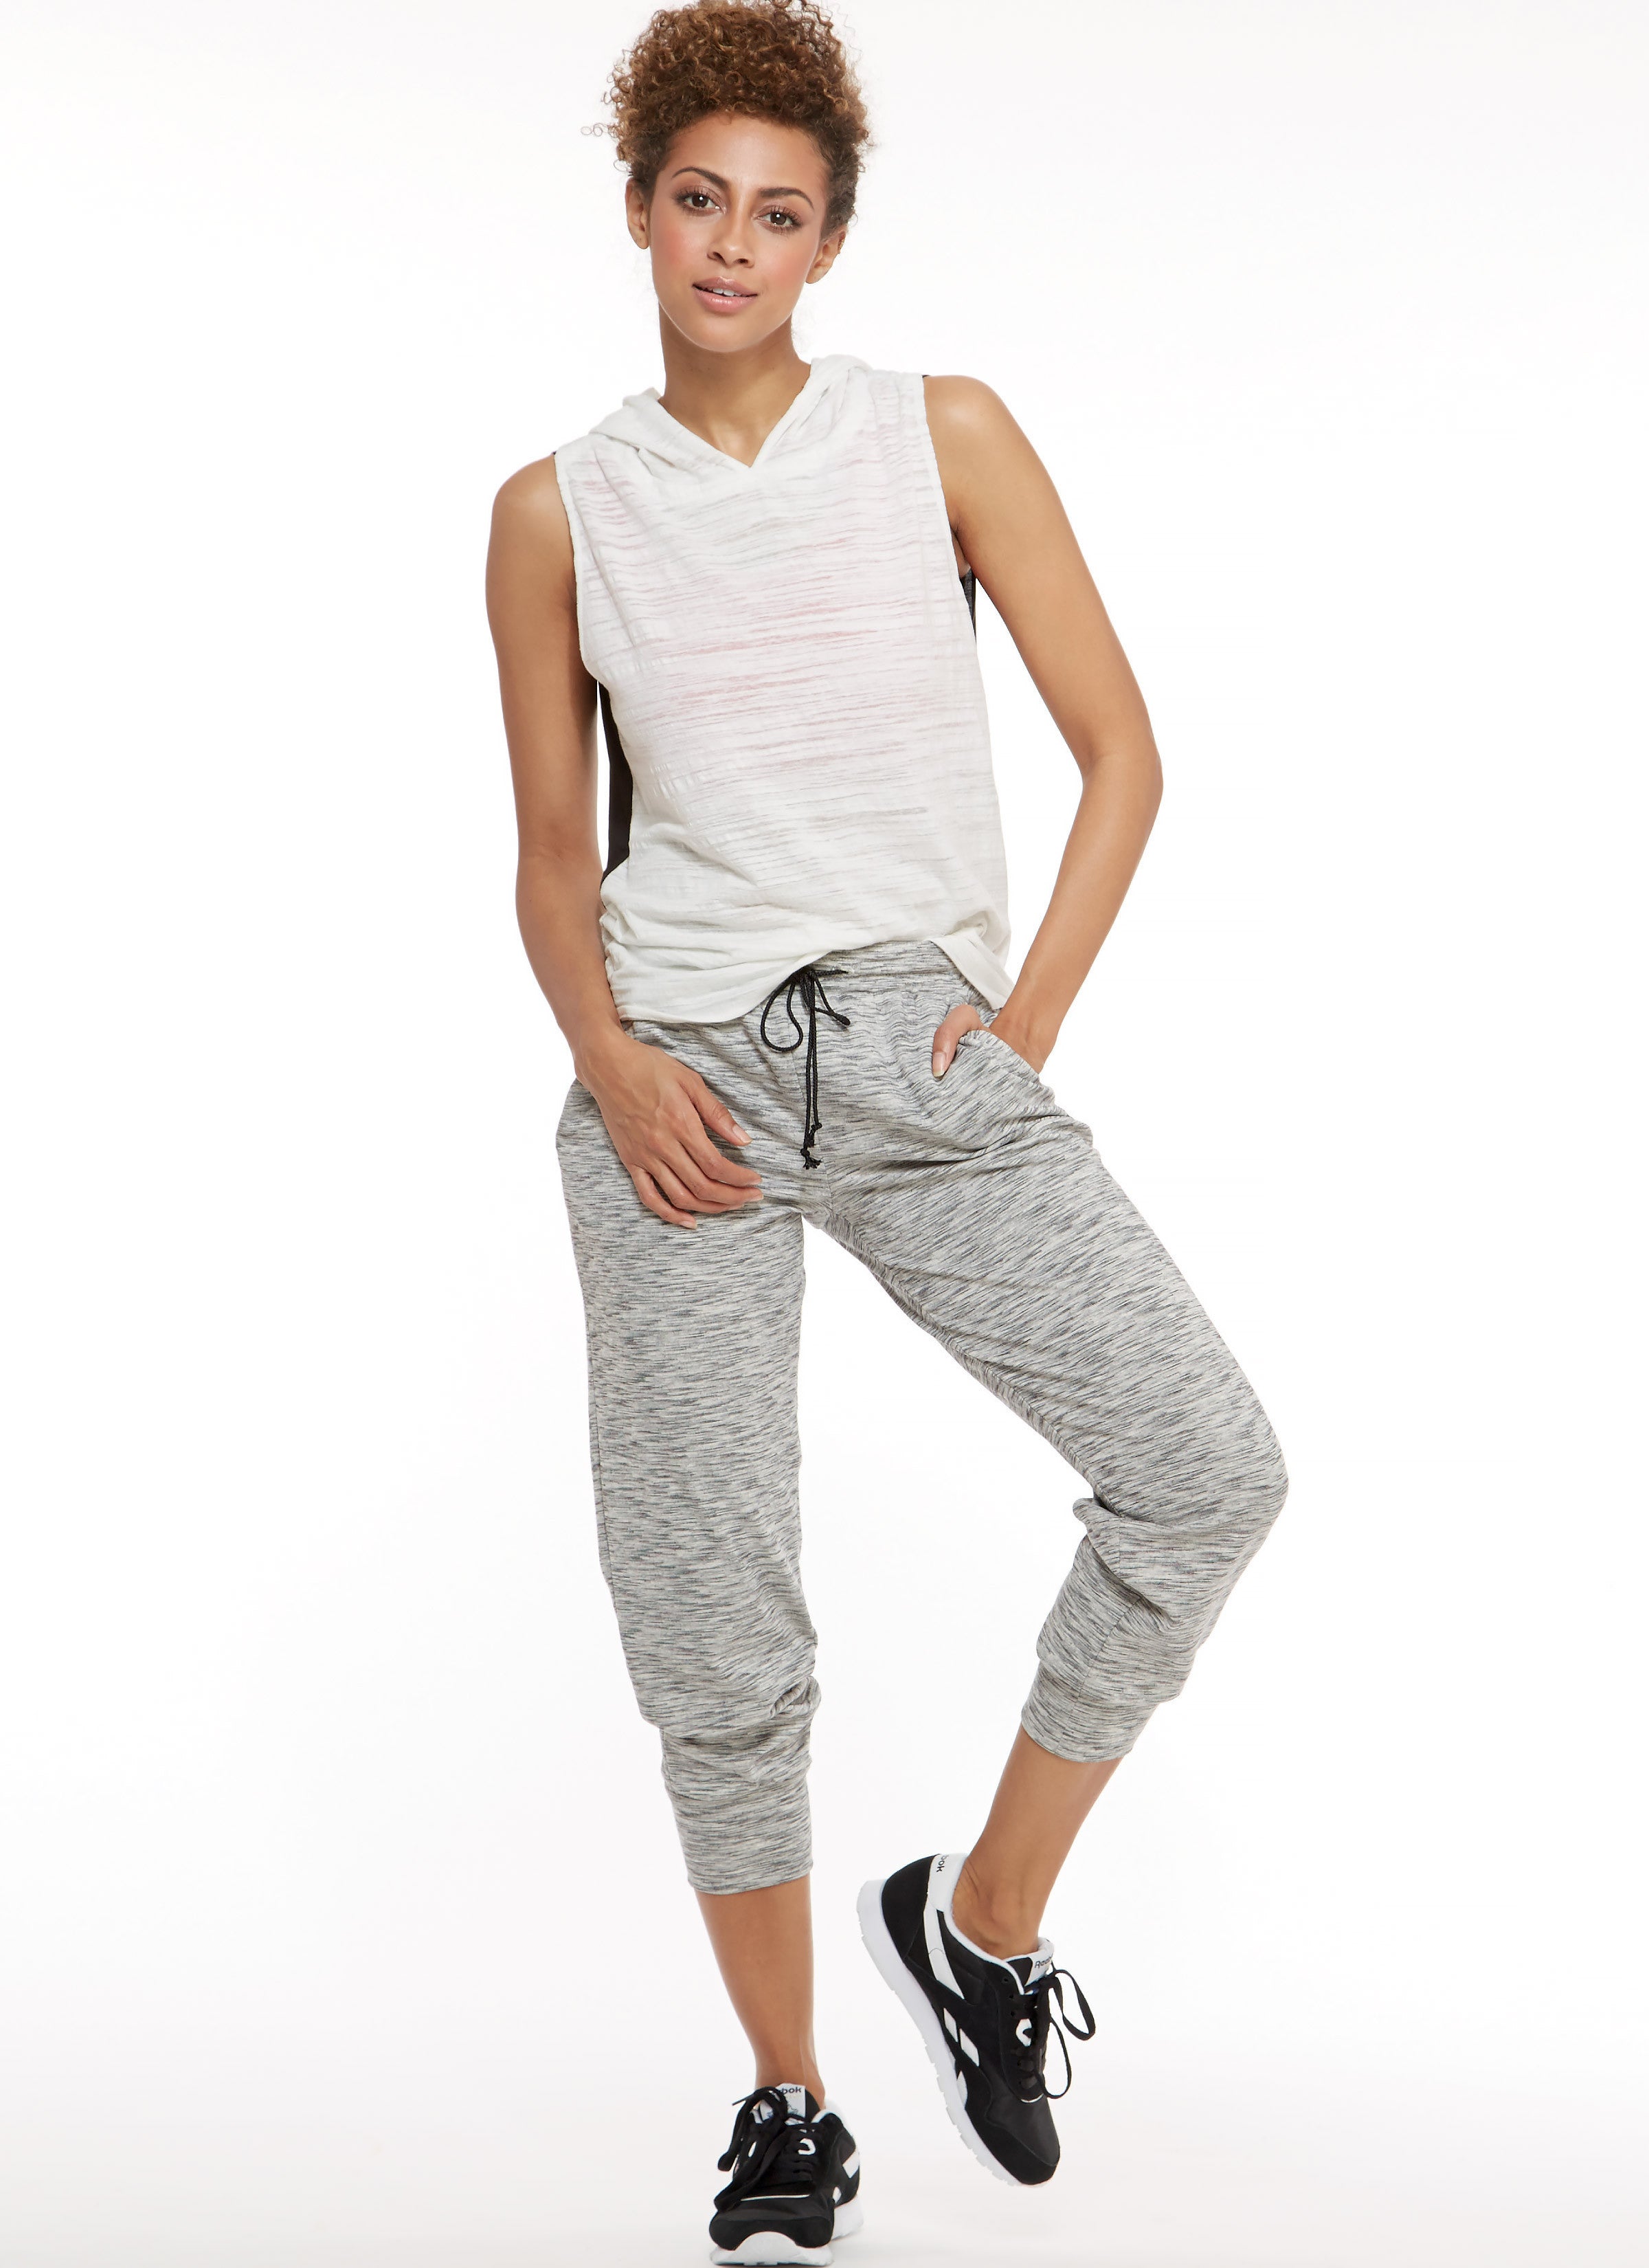 M7610 Pullover Tops and Pull-On Shorts and joggers from Jaycotts Sewing Supplies